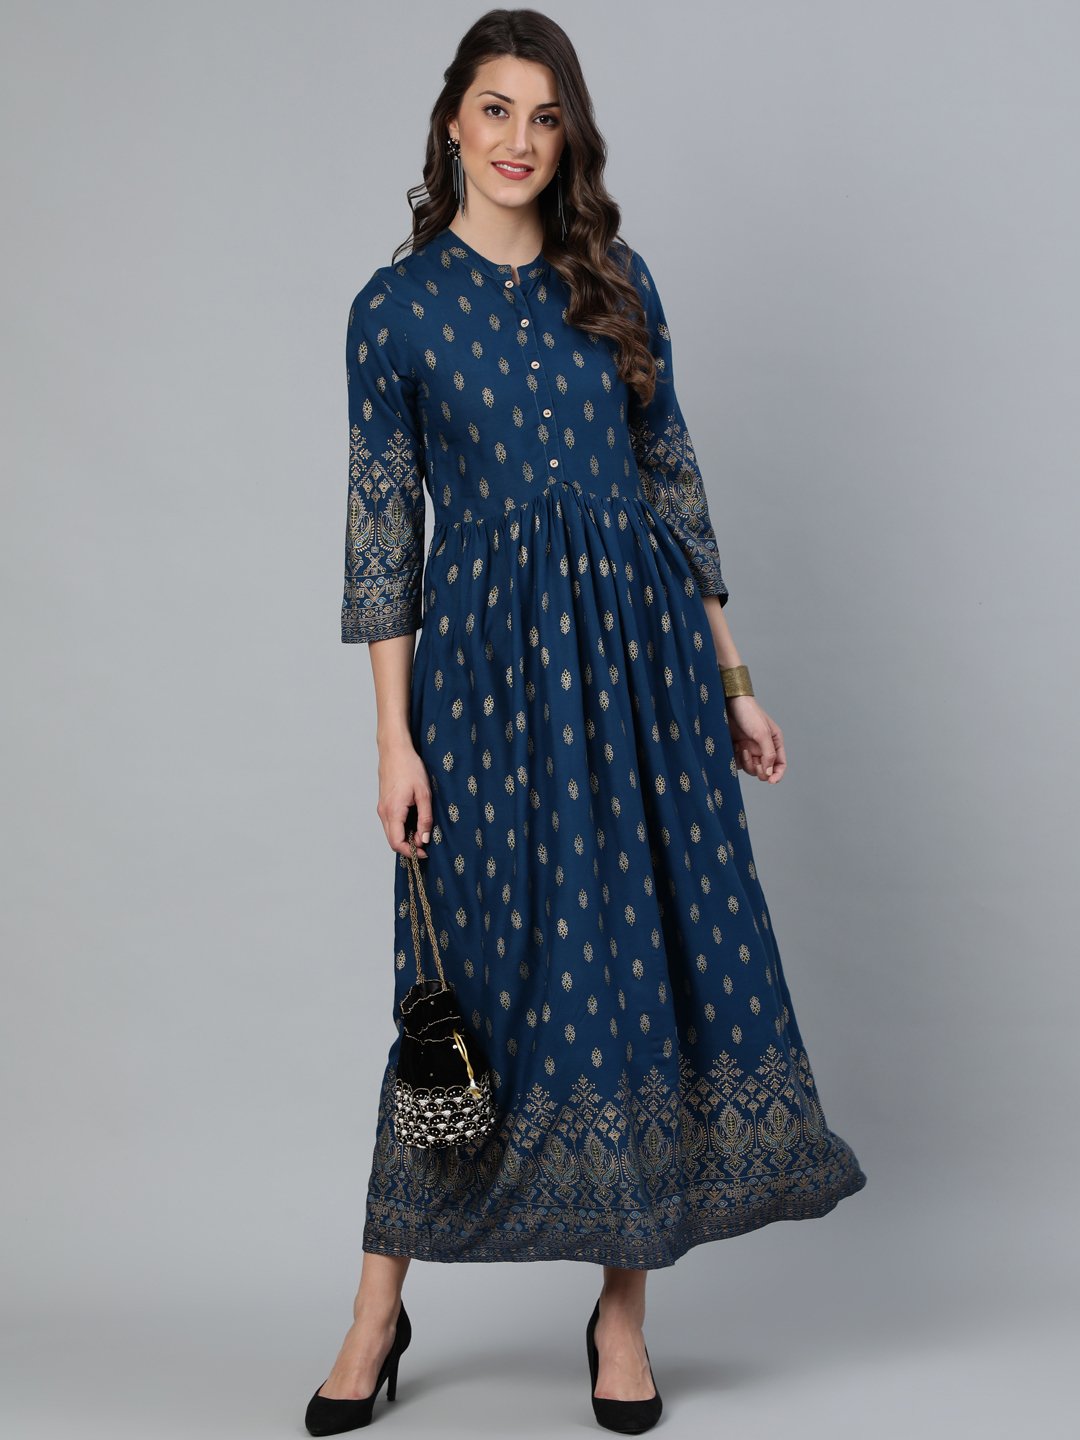 Women's Teal Blue Printed Maxi Dress With Three Quarter Sleeves - Final Clearance Sale